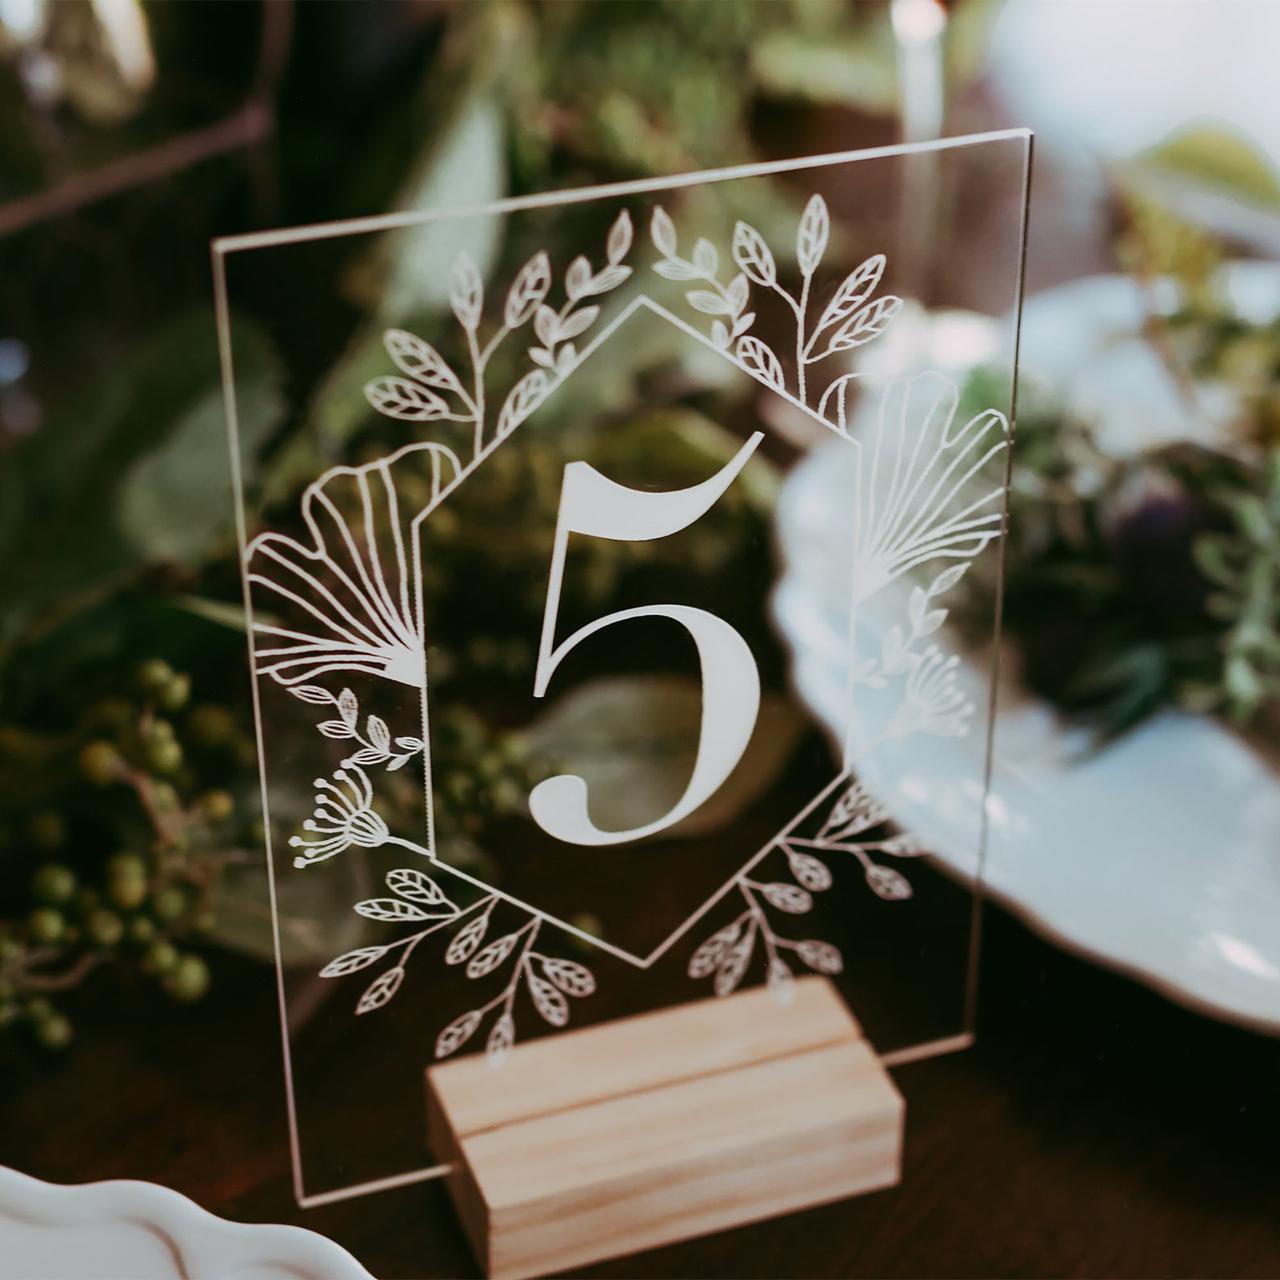 Plexiglass Table Number Venue Table Number Clear Acrylic Table Numbers With Wood Base Restaurant Table Number